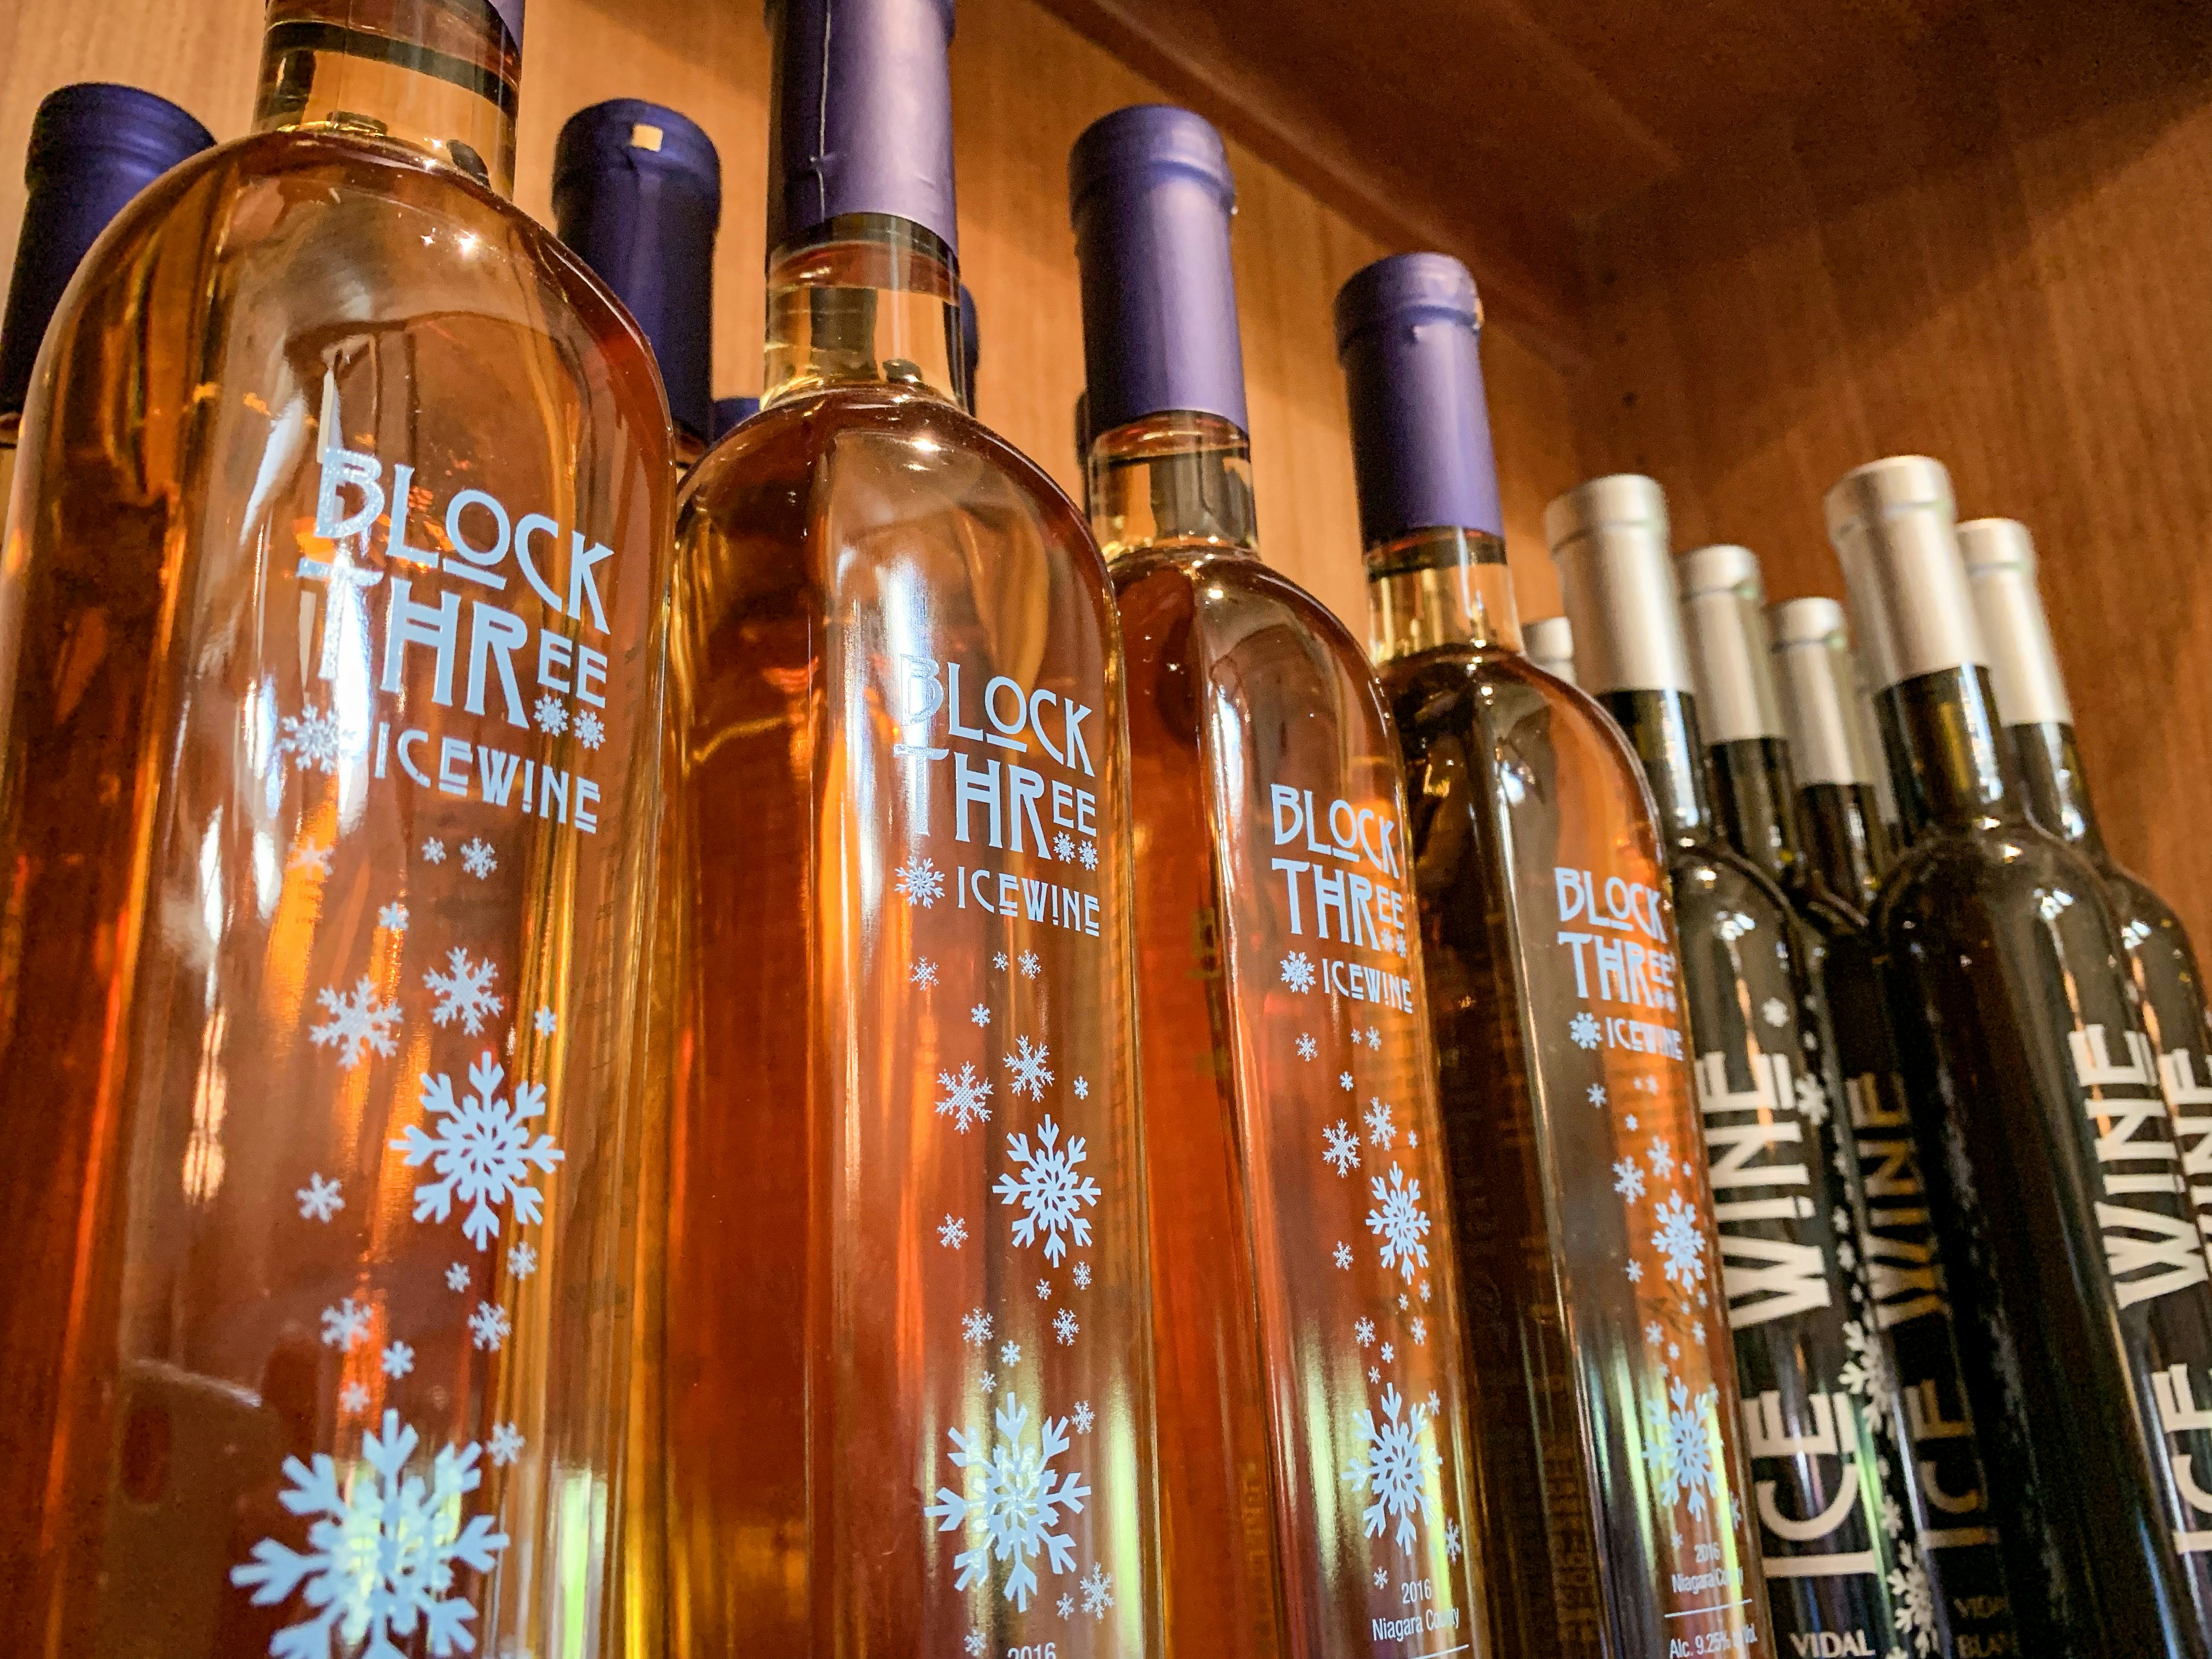 A collection of block three ice wine bottles sit on a wooden shelf 